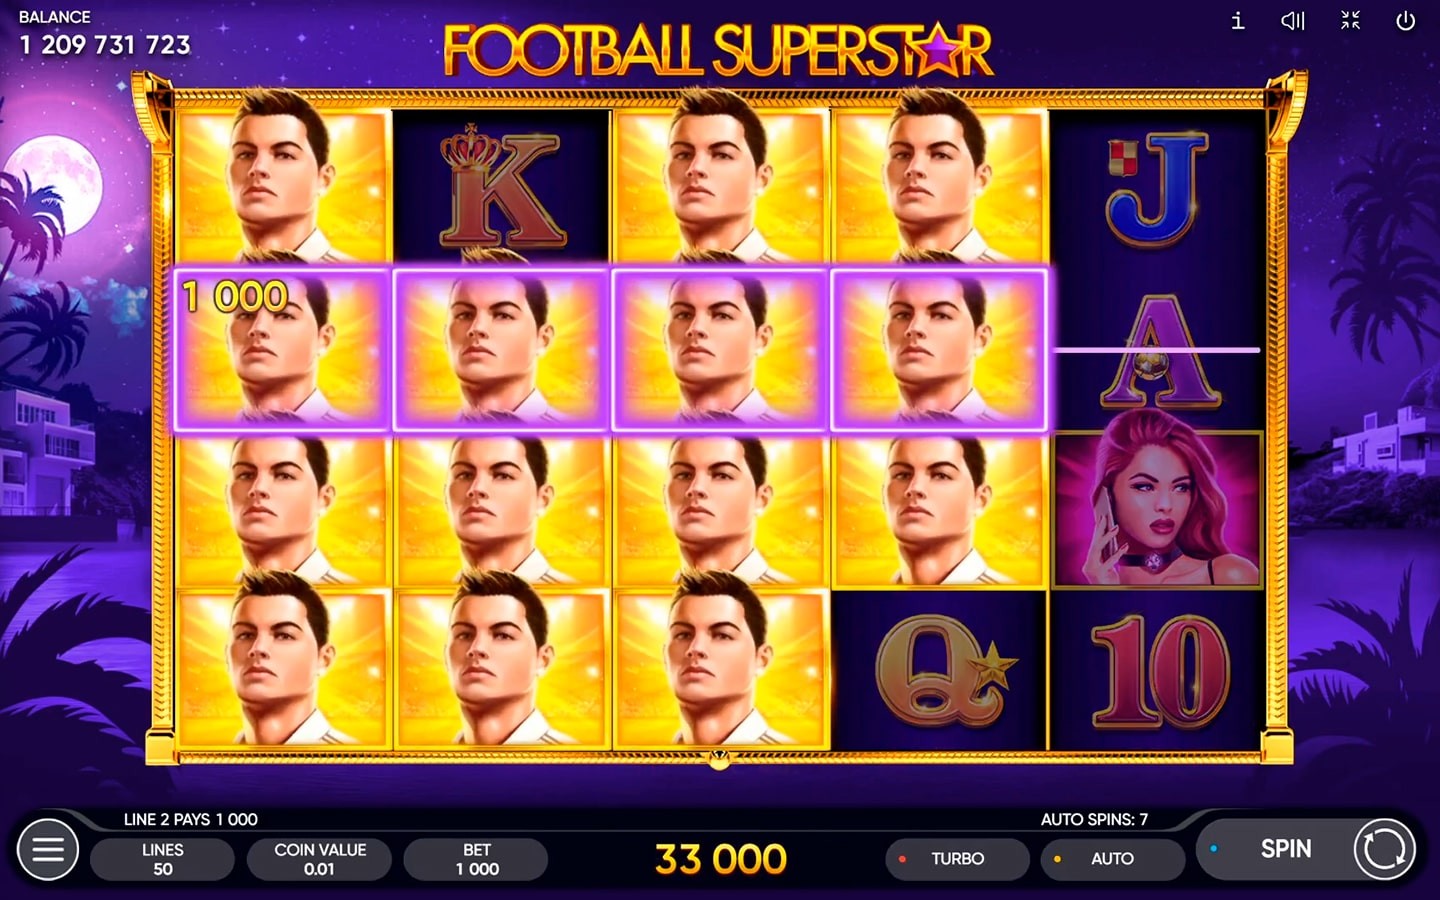 BEST FOOTBALL SLOTS OF 2020 | Try FOOTBALL SUPERSTAR GAME by Endorphina